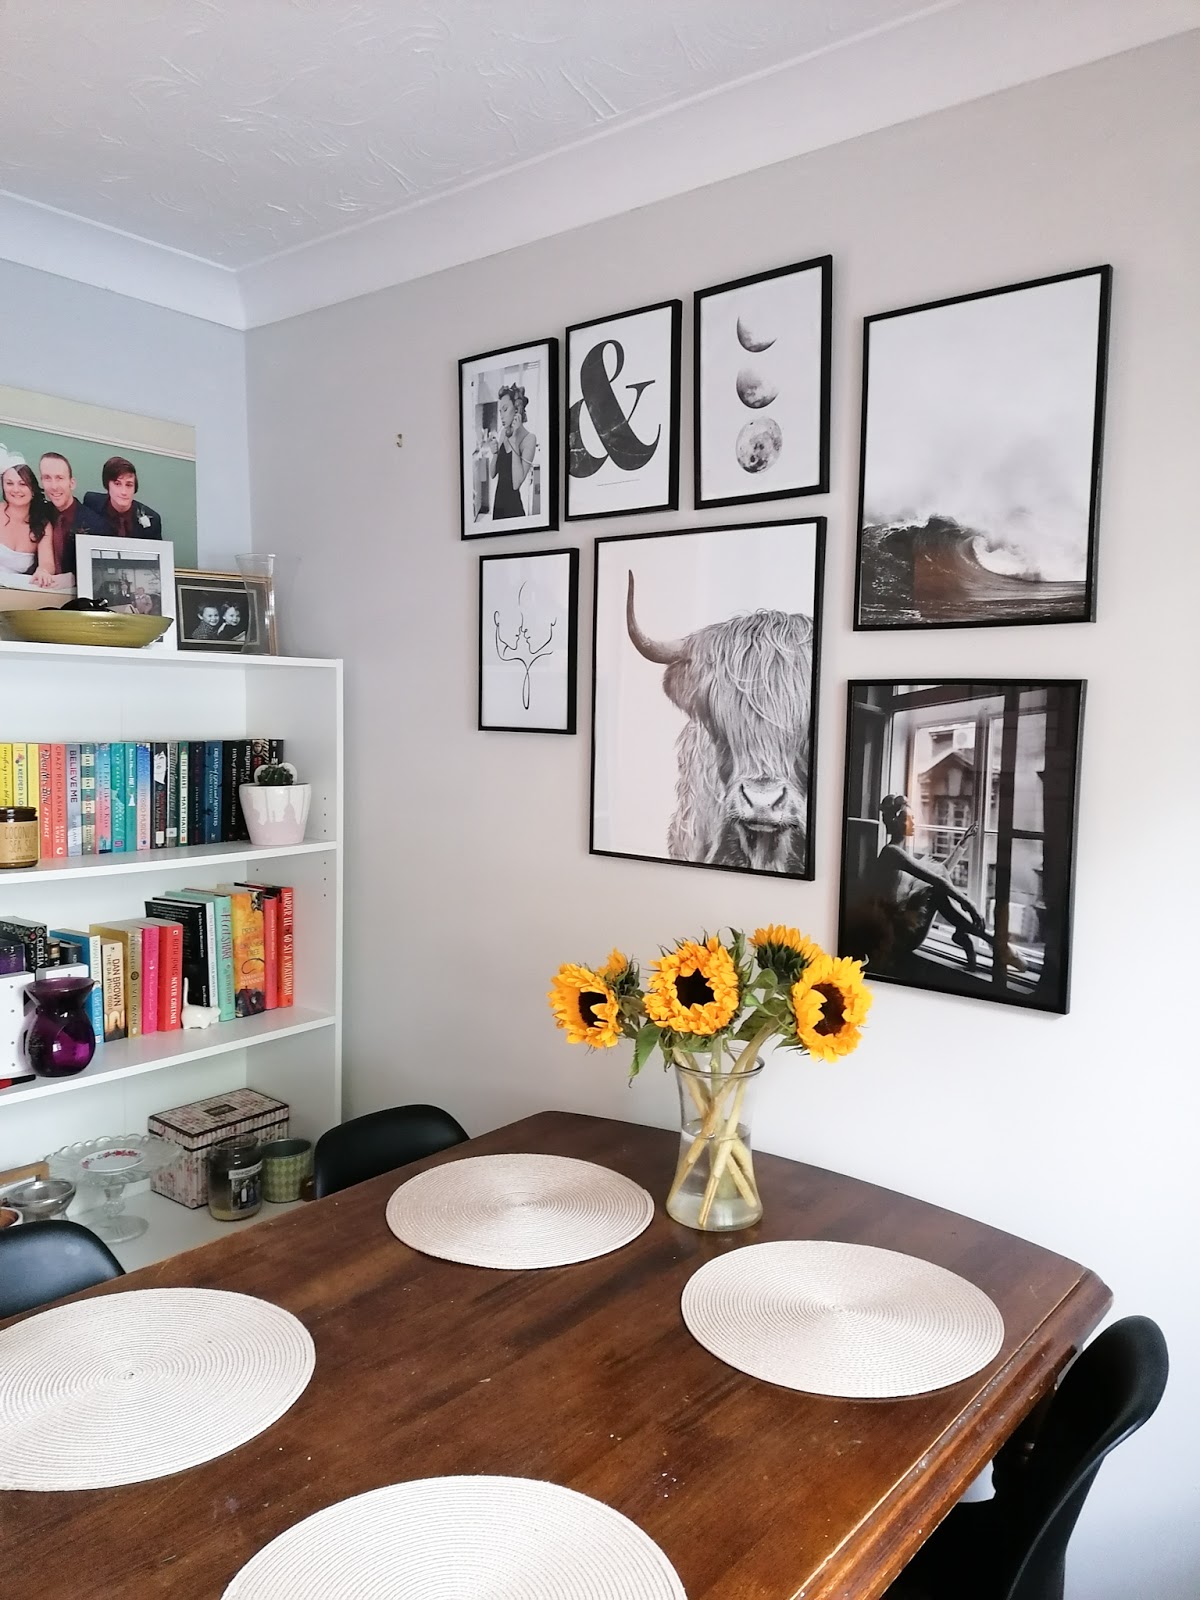 My tips for creating a gallery wall